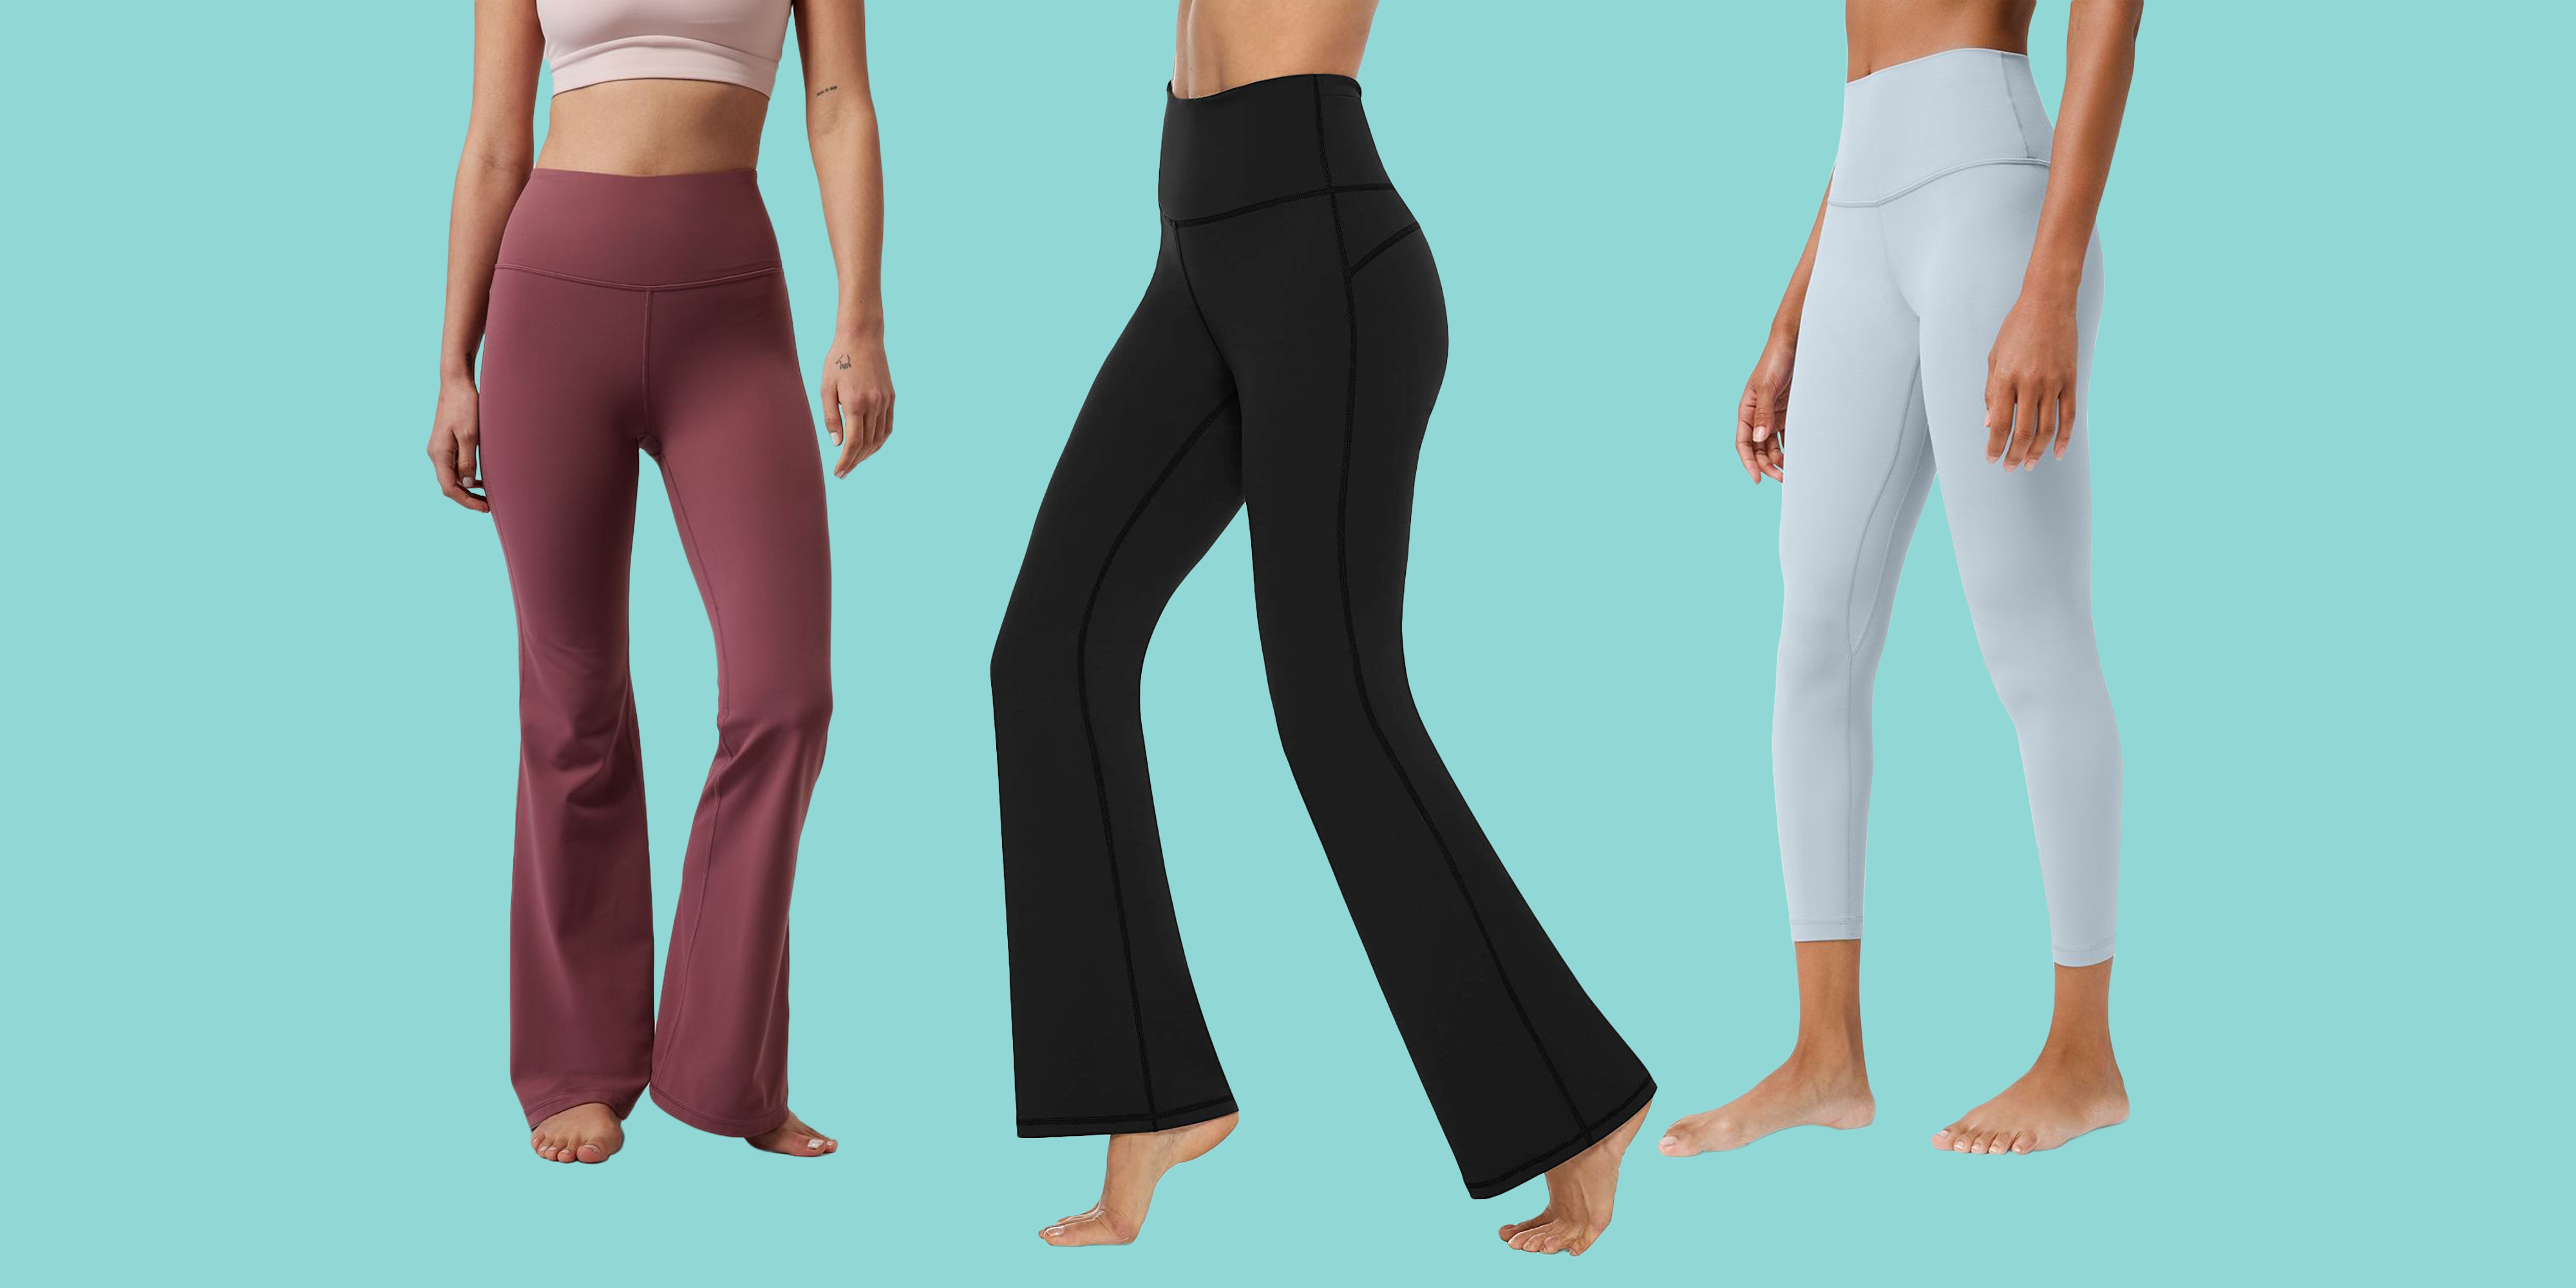 ButtLifting Pairs of Leggings for 2022  Our 5 Top Picks